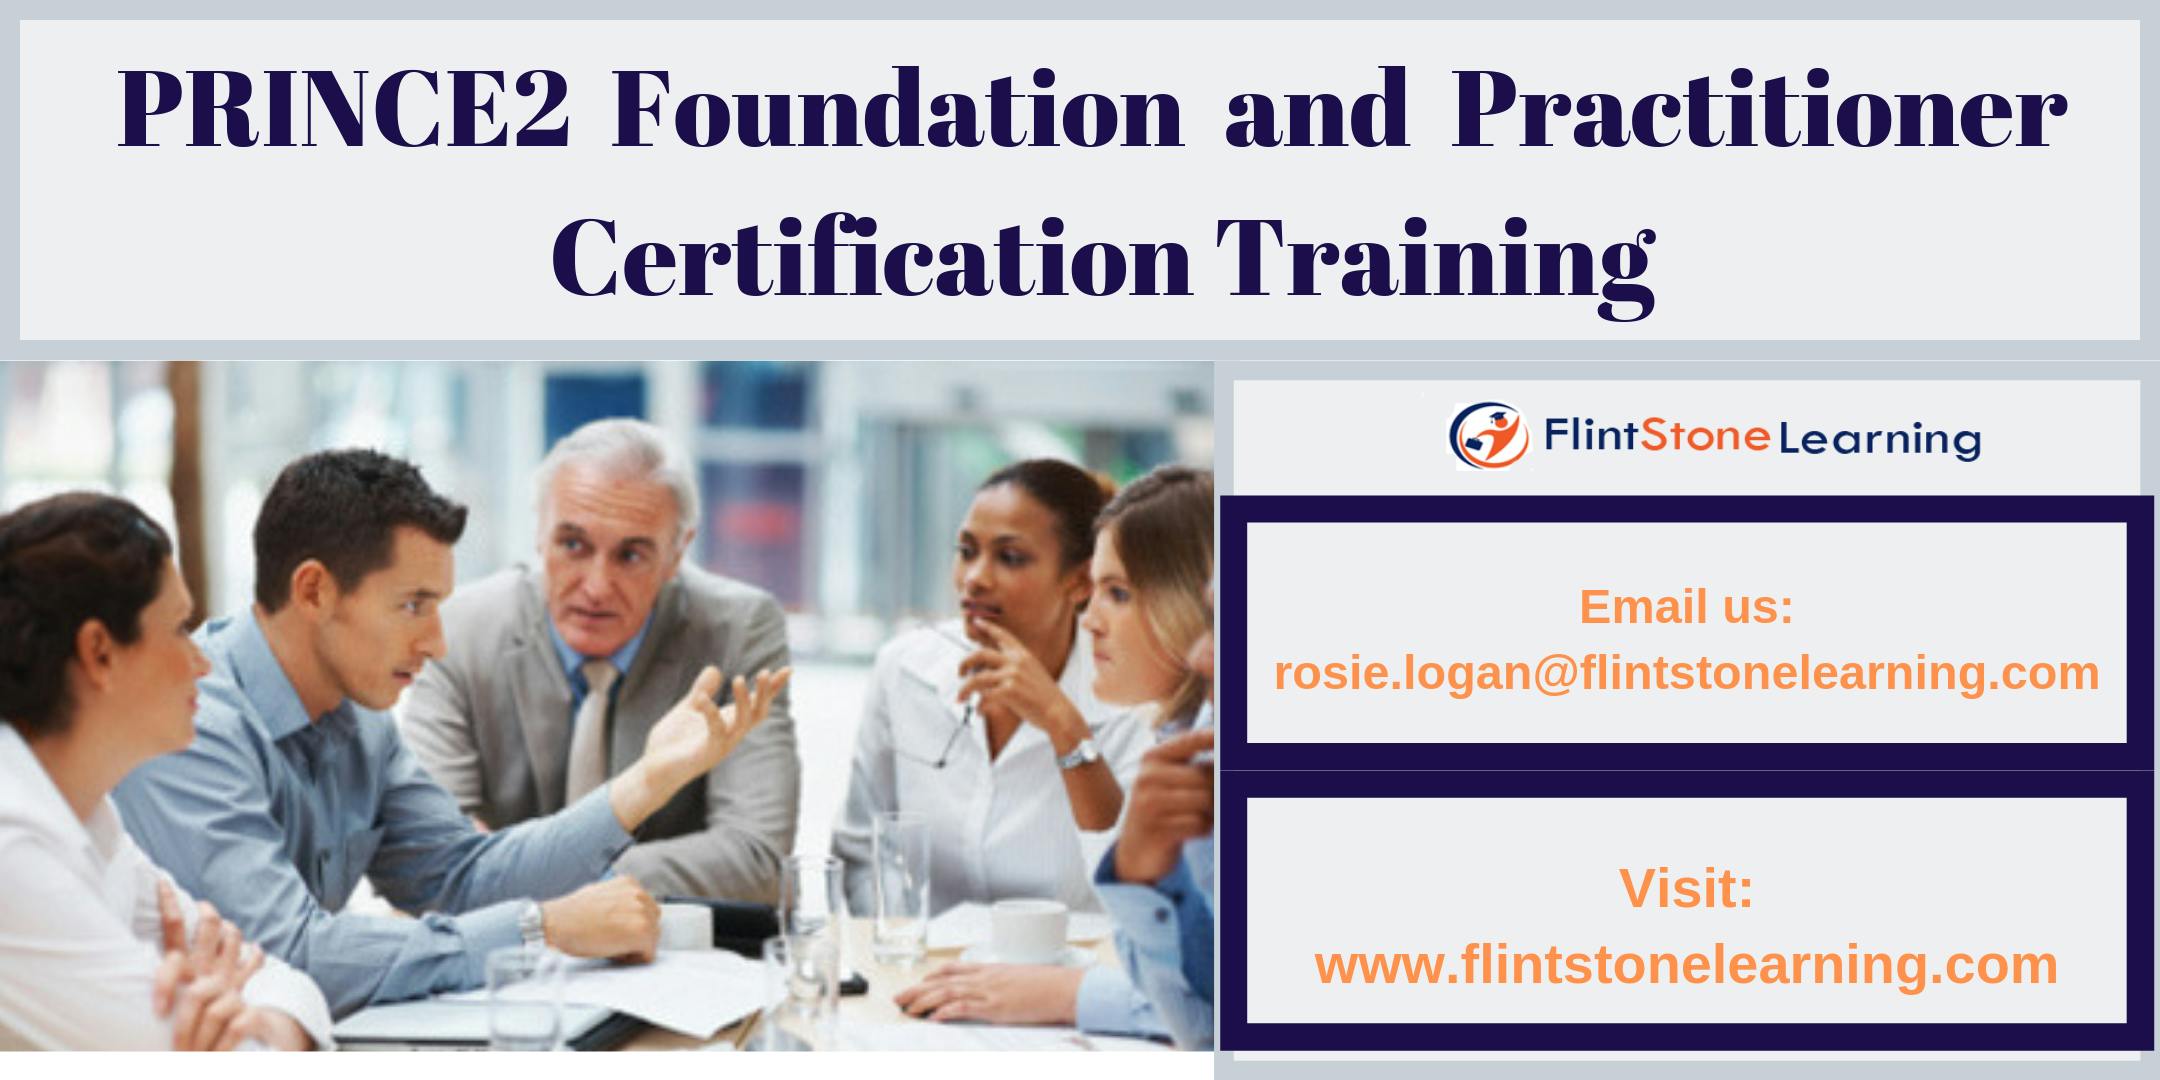 PRINCE2 Foundation and Practitioner Certification Training Course in Brisbane City,QLD